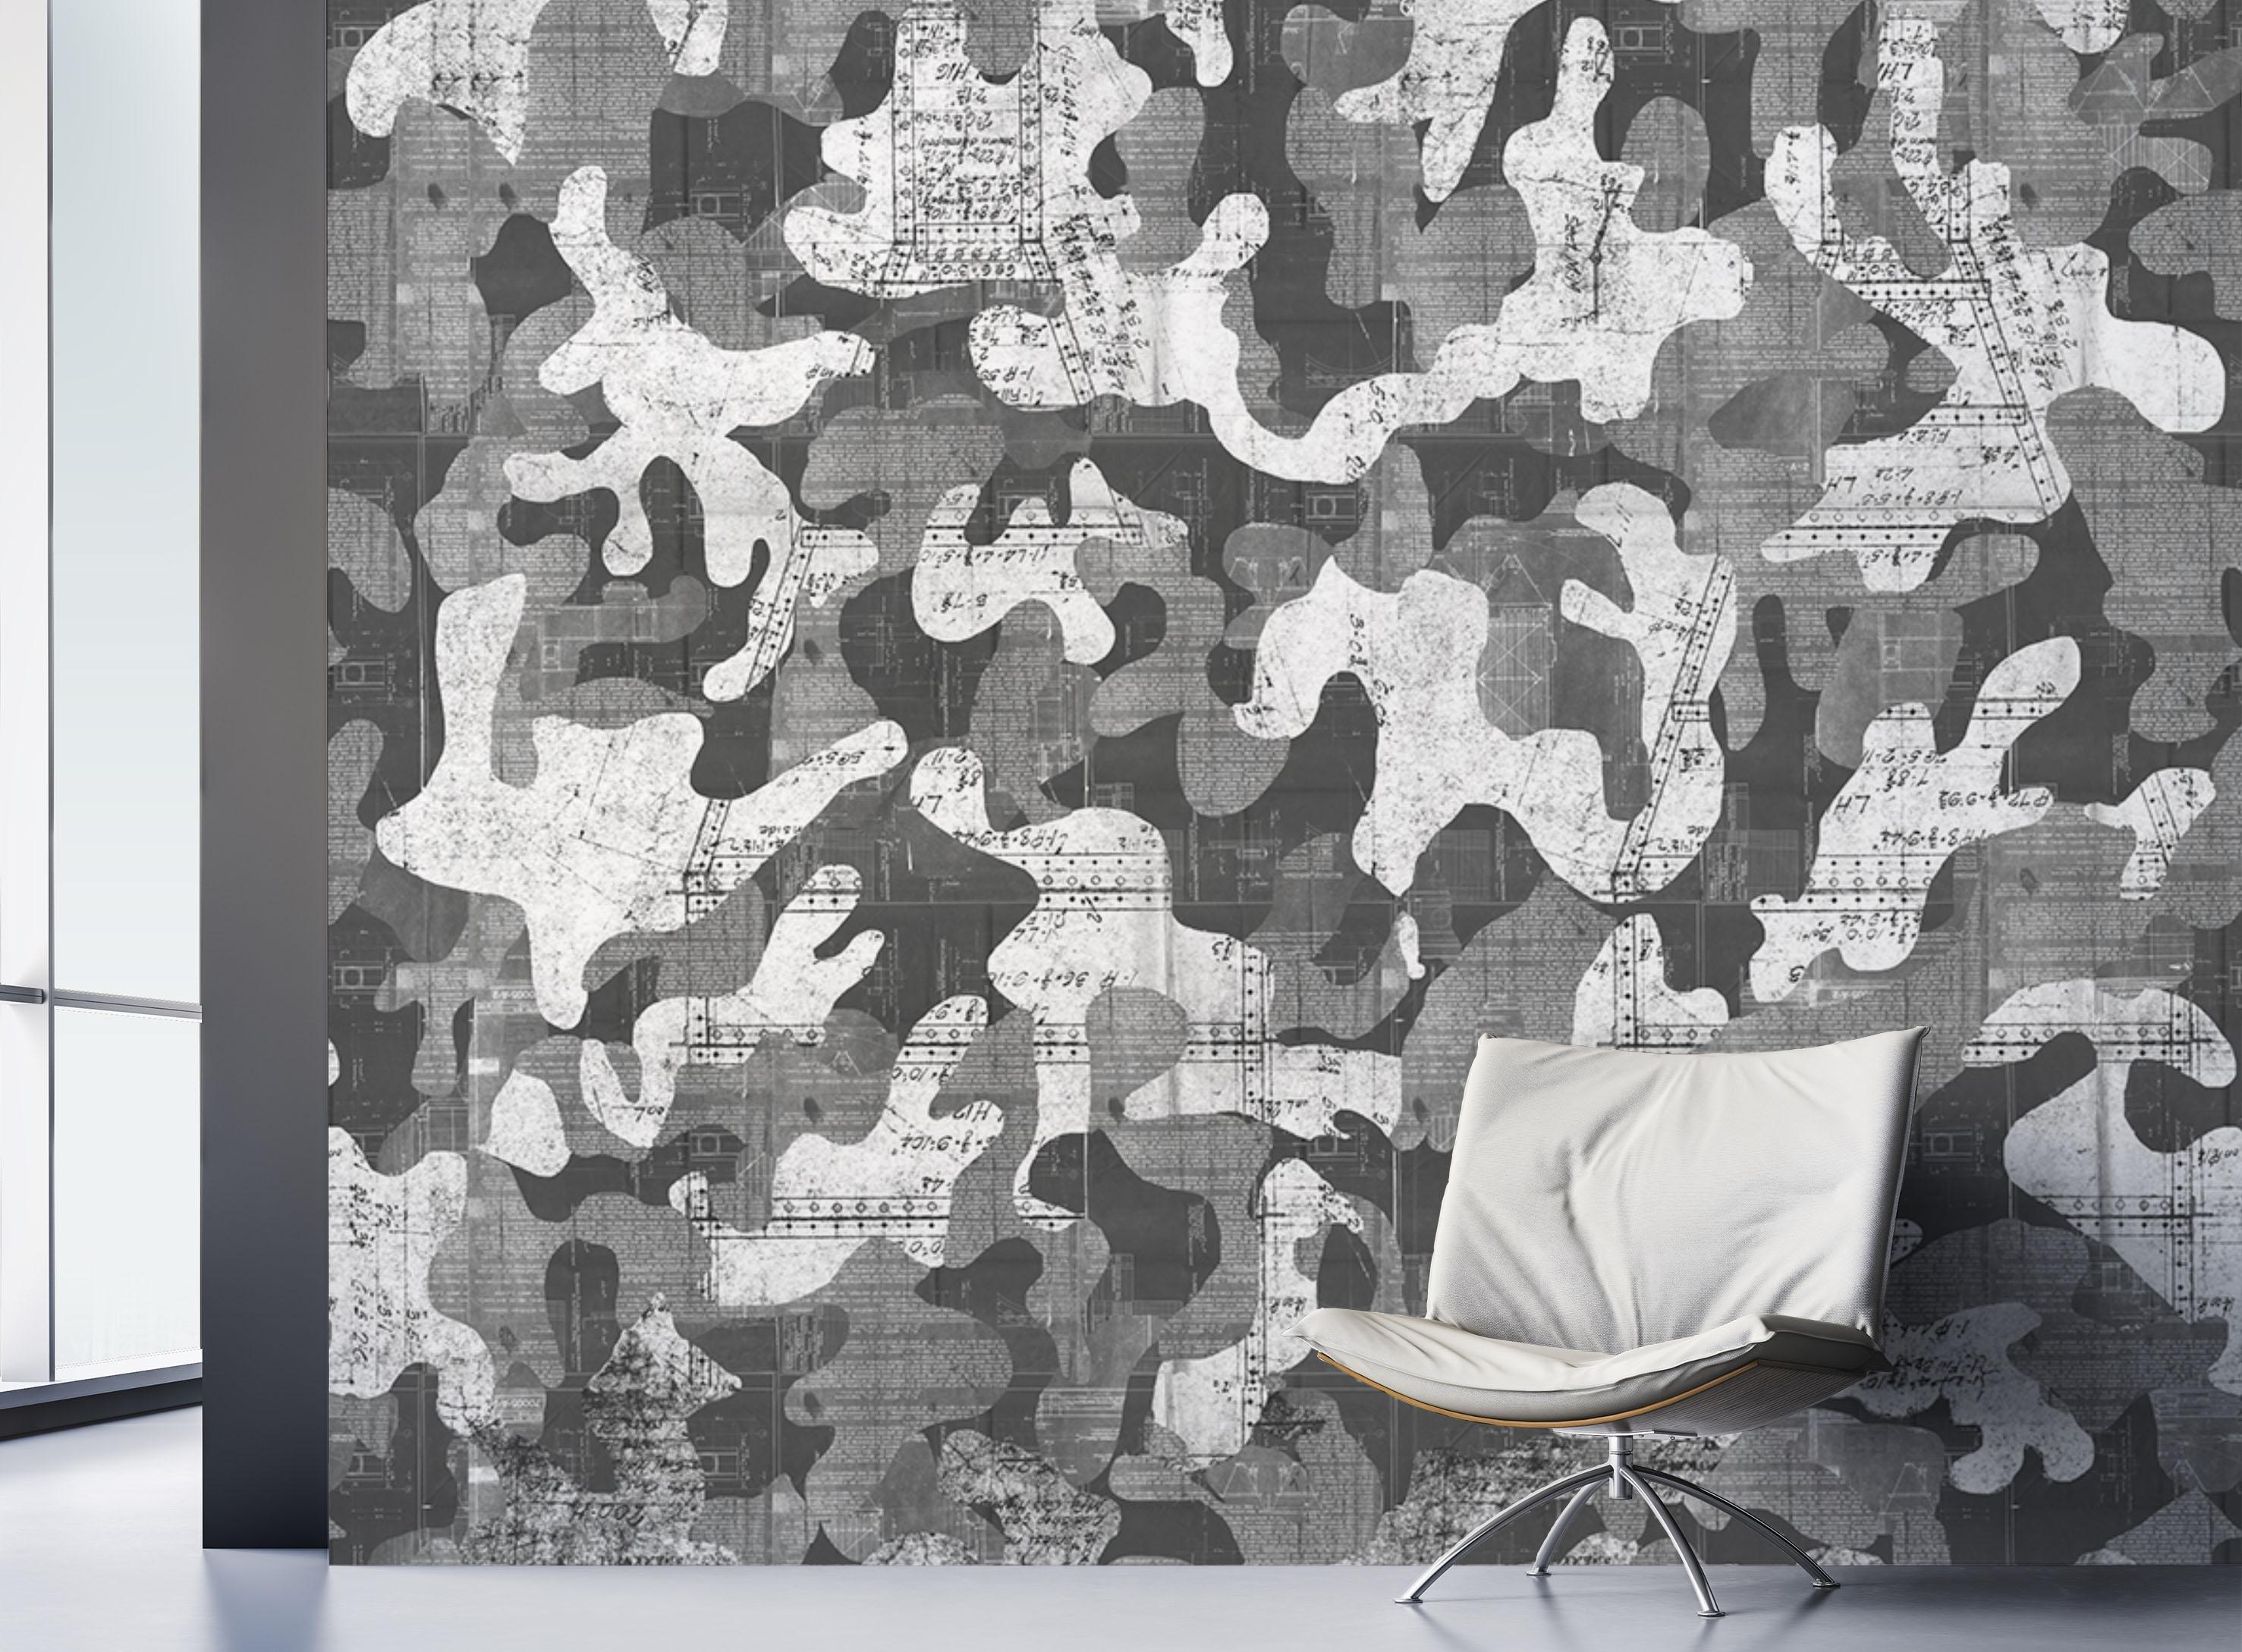 Escape was created using found vintage blue prints from the early to mid-1900s and placed into a fluid, hand drawn camouflage pattern. Intrigued by the idea that blue prints and came have a utilitarian purpose, we combined them creating an opposite